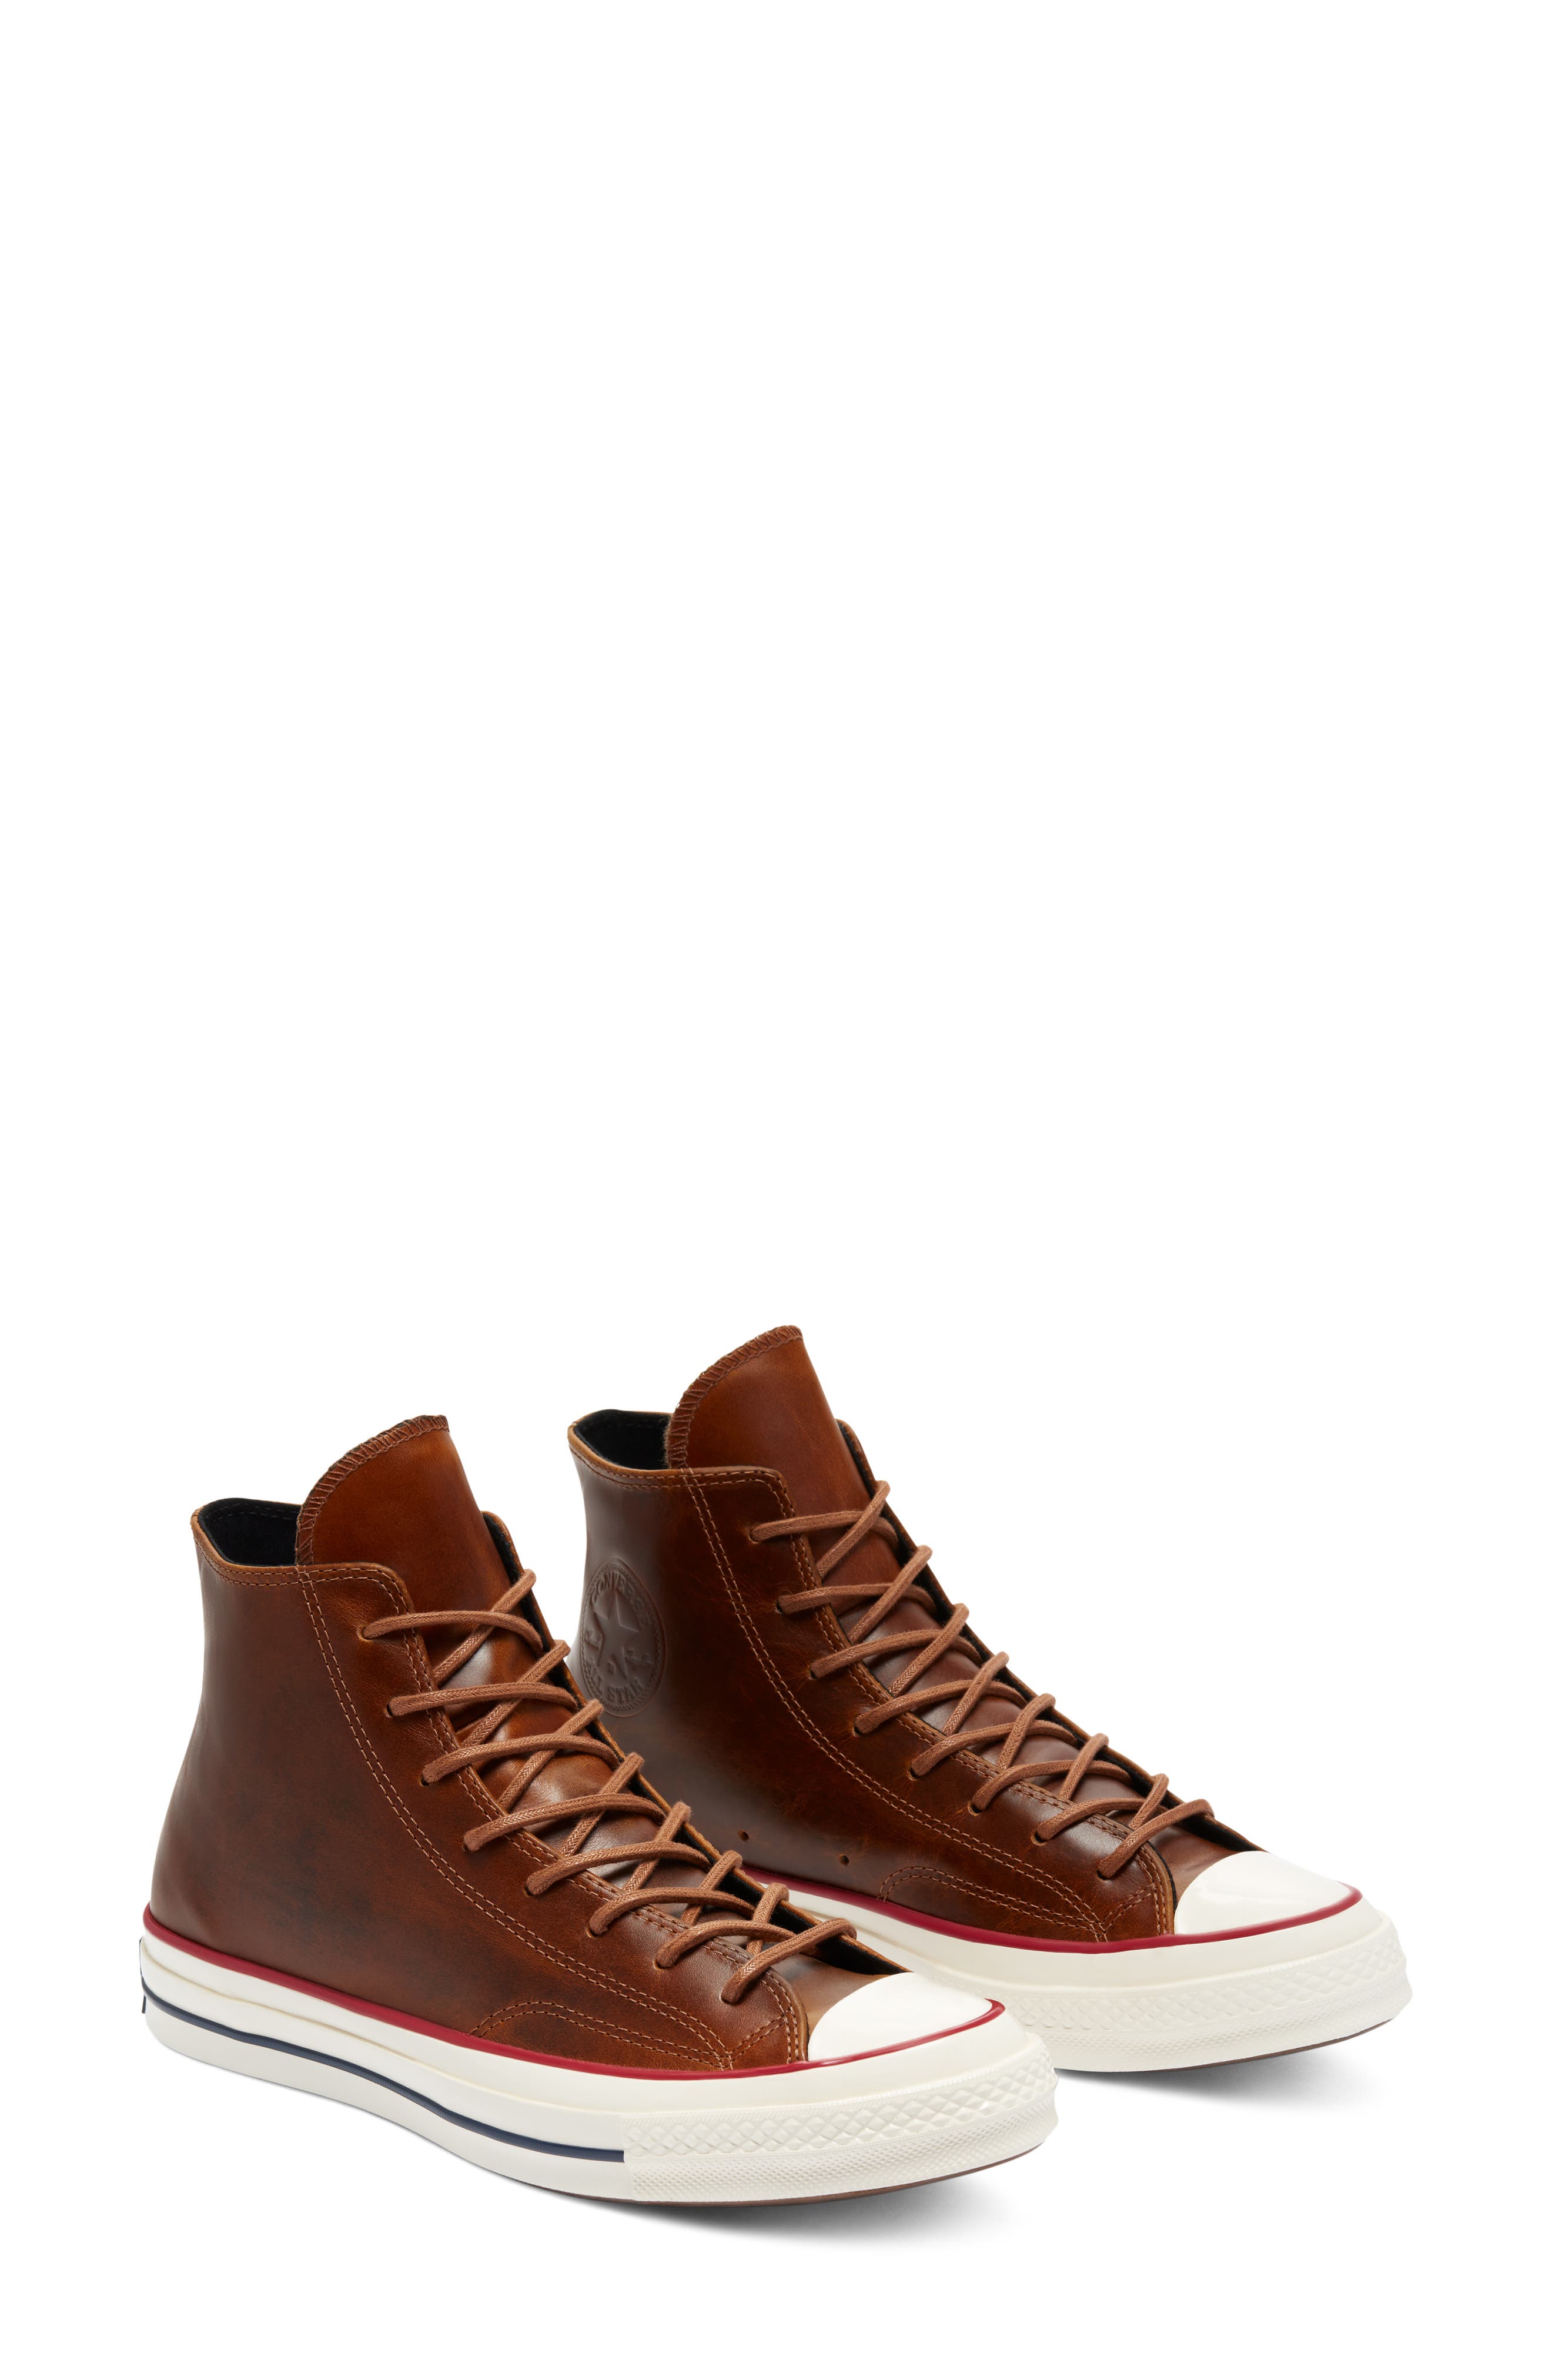 brown converse shoes